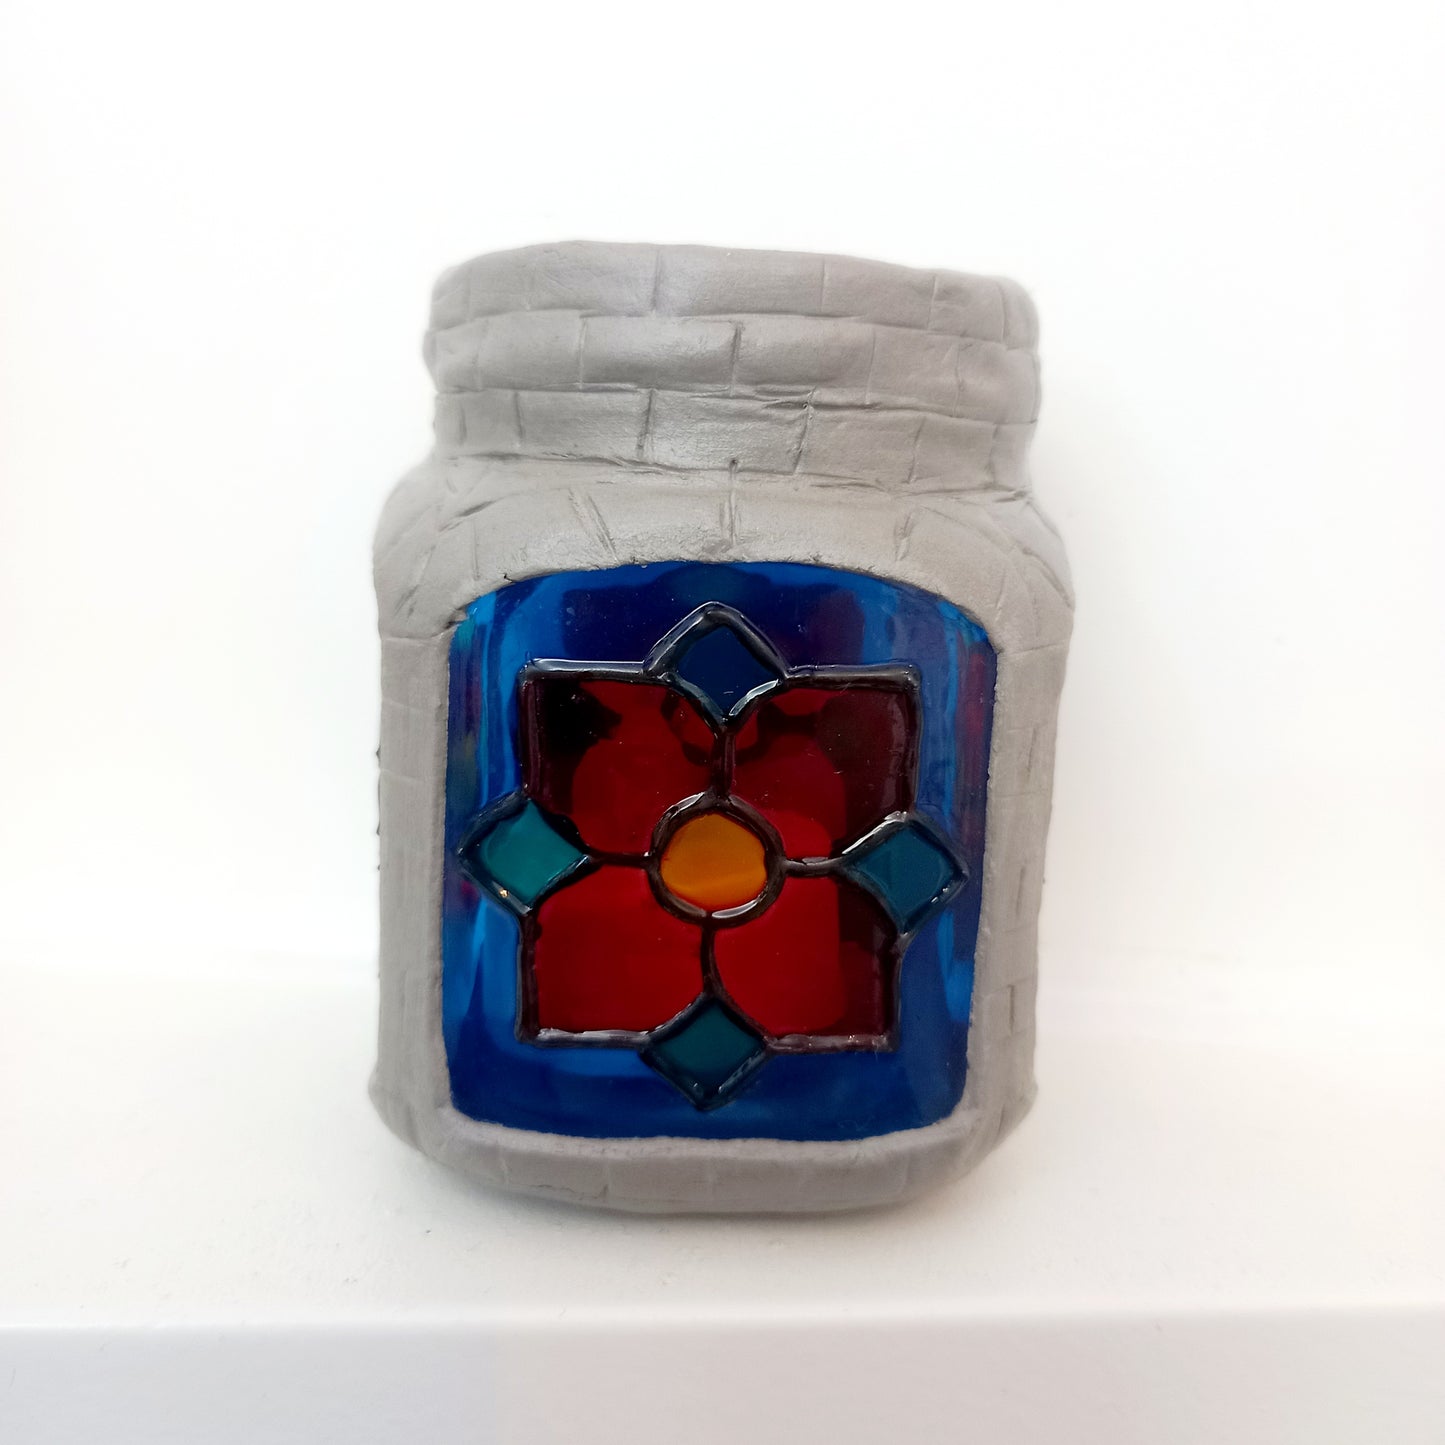 "Stained Glass Effect Tea Light Holders"